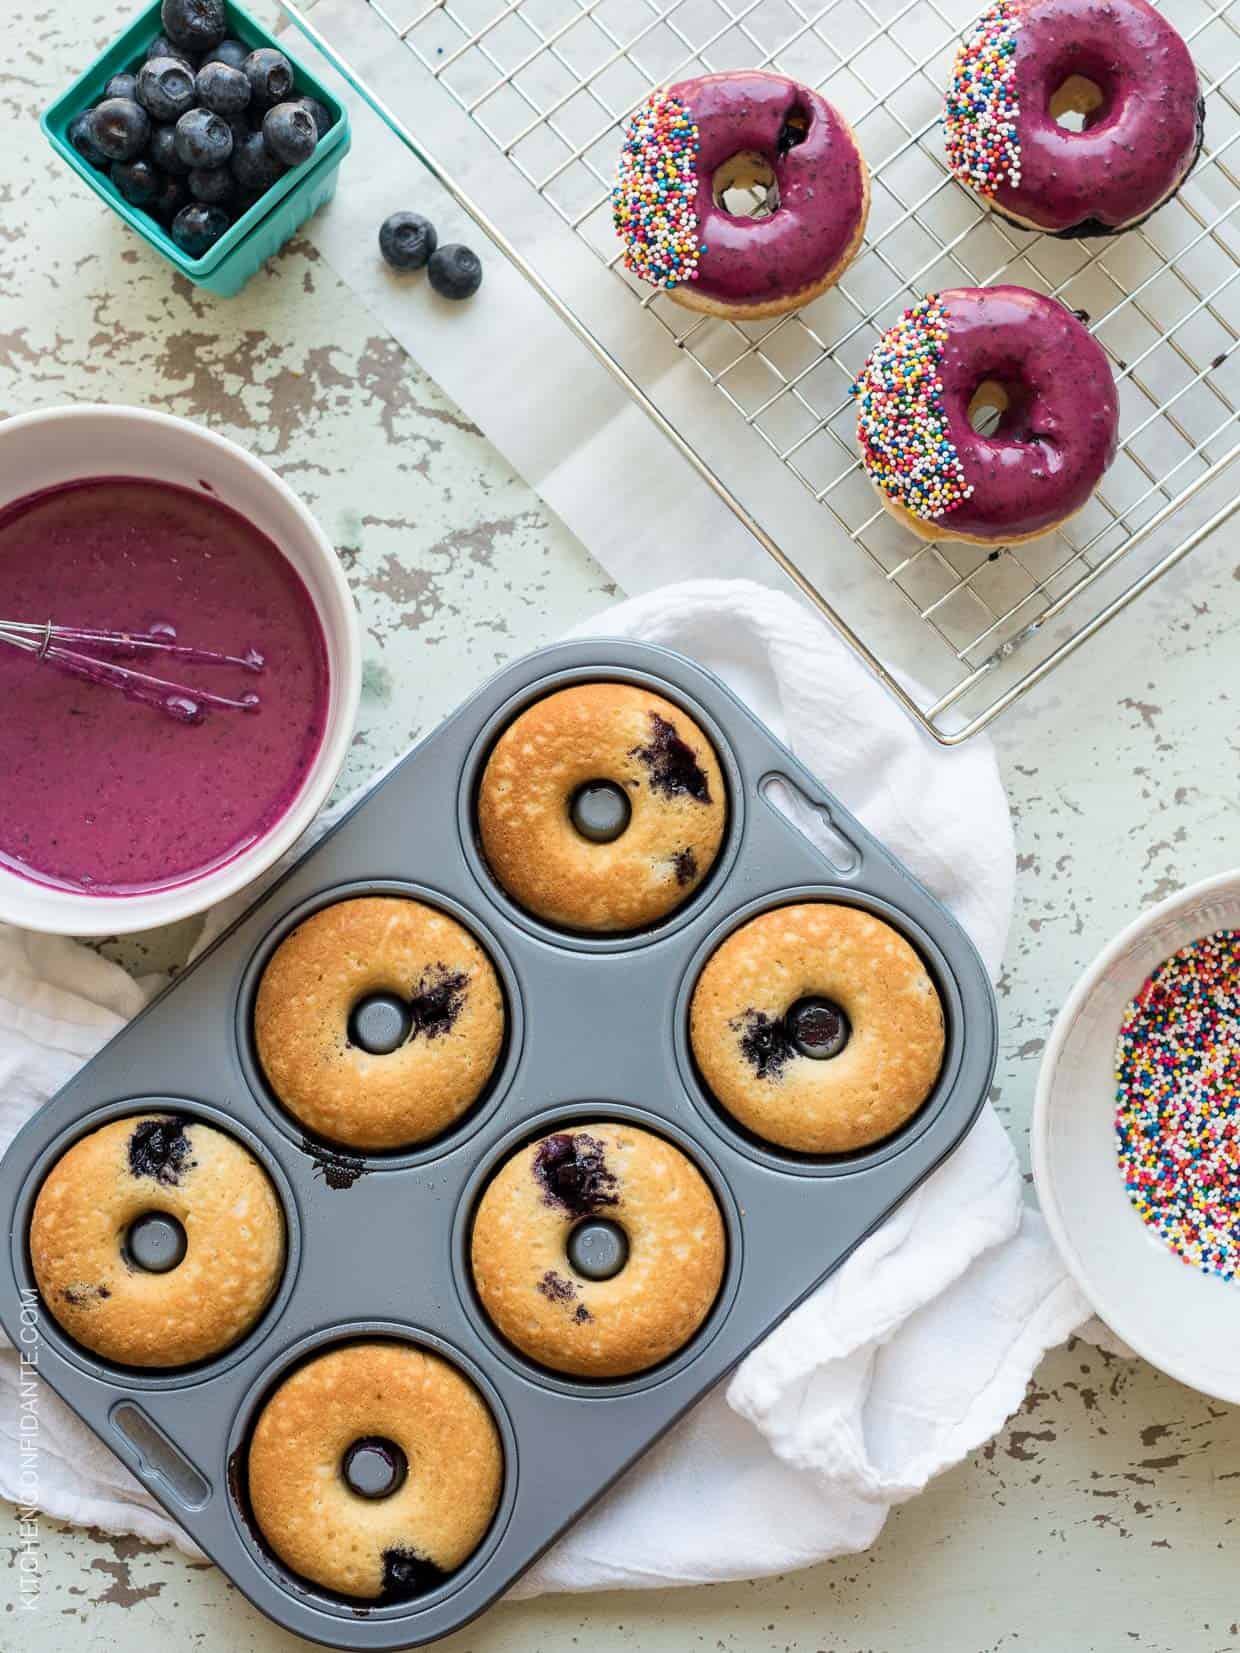 Freshly baked Blueberry Lemon Glazed Baked Donuts about to be glazed and topped with multi-colored sprinkles.